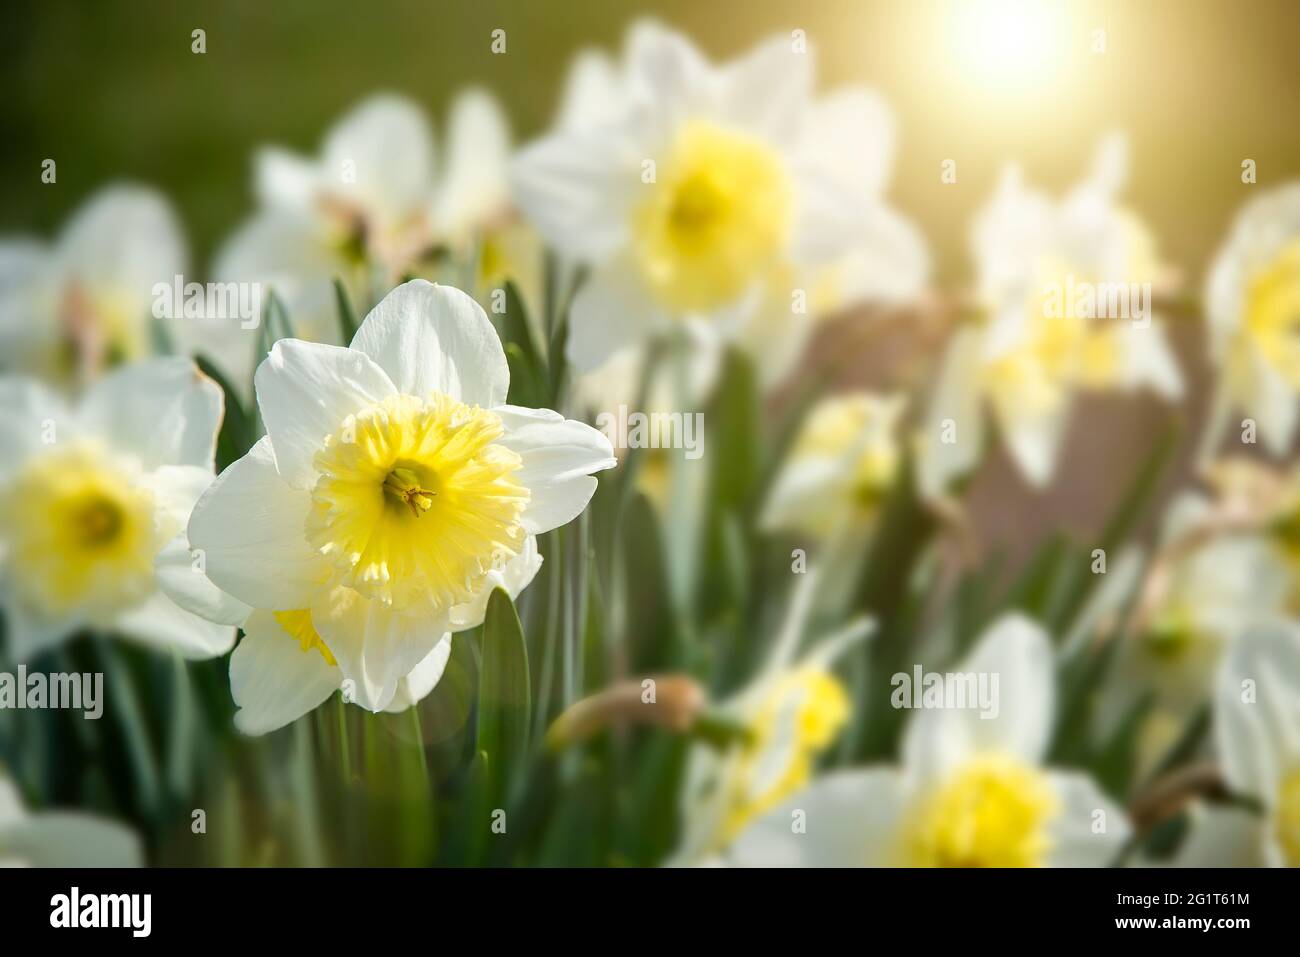 Field of Daffodils with a sun glow Stock Photo